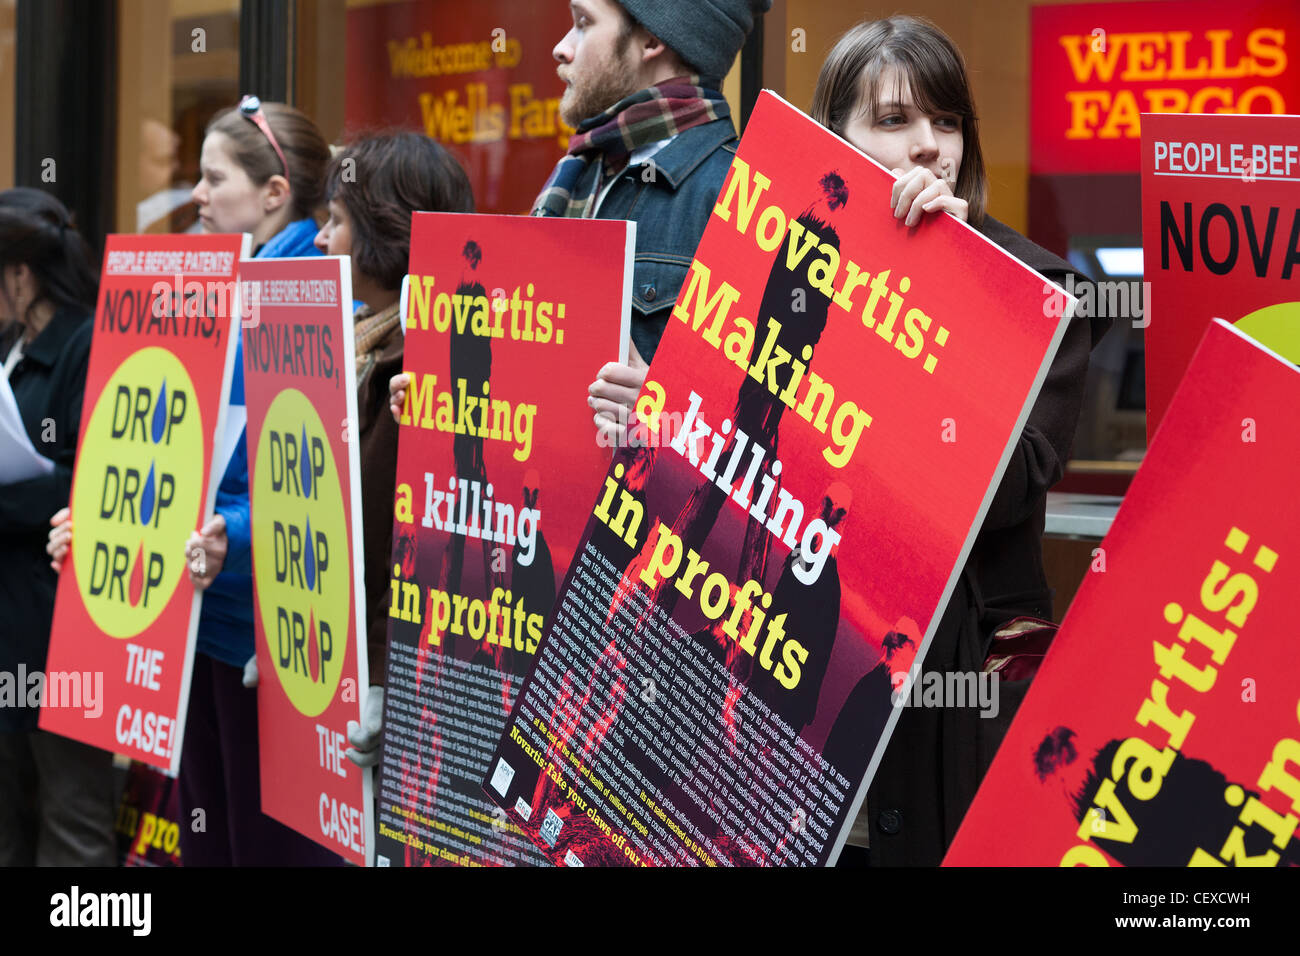 Volunteers from the group Doctors Without Borders protest in front of the offices of the Novartis drug company in New York Stock Photo